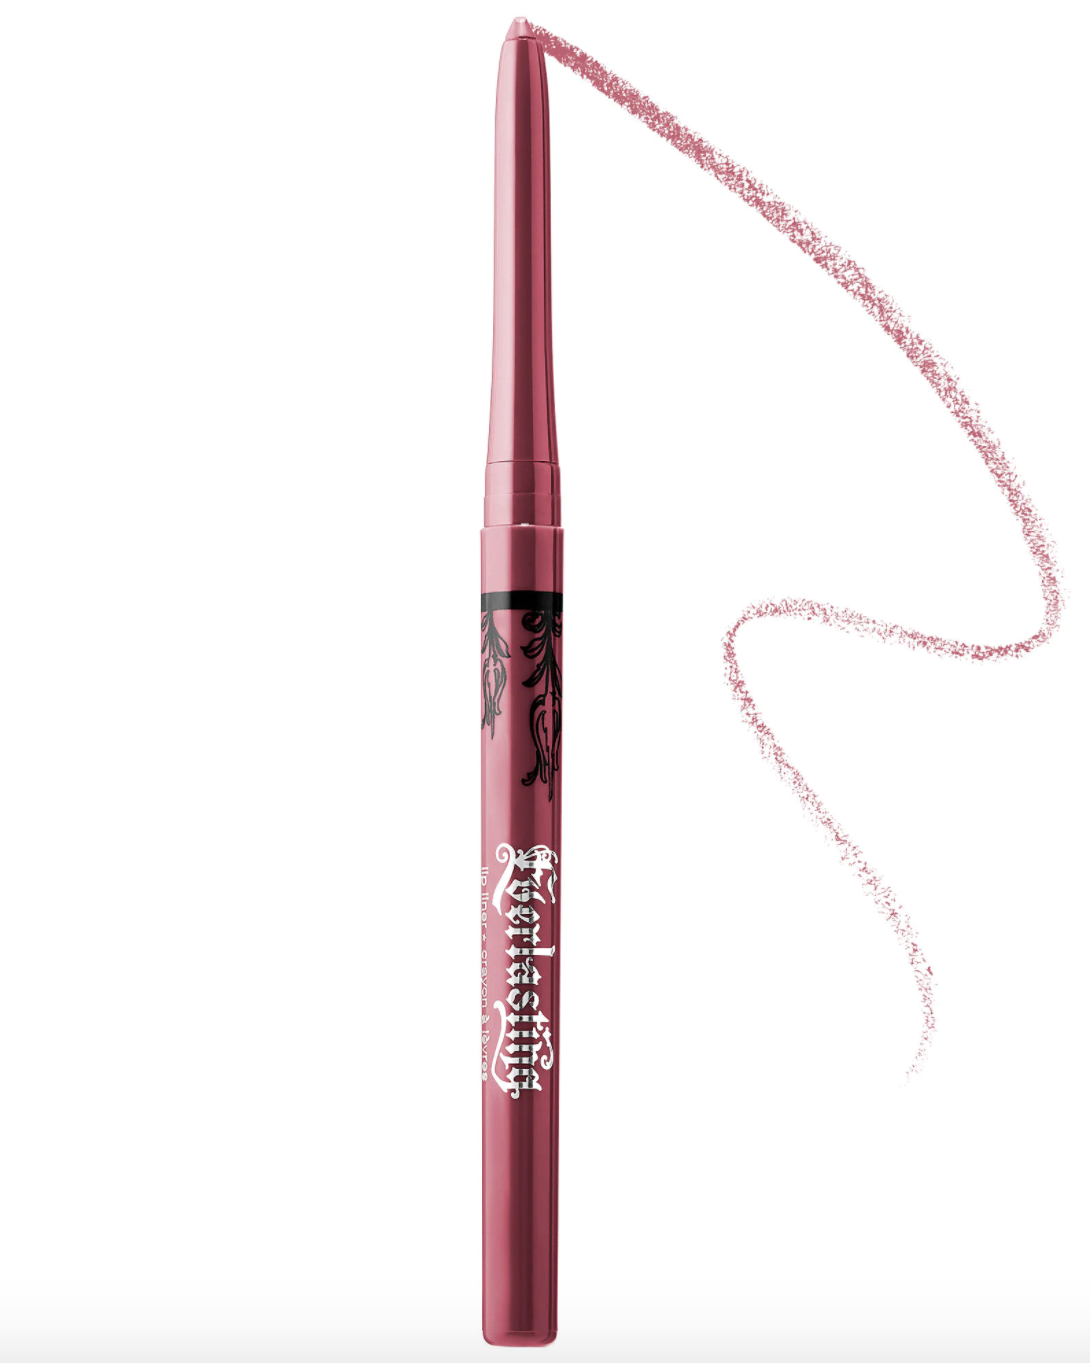 The lip liner in a mauve pink shade 